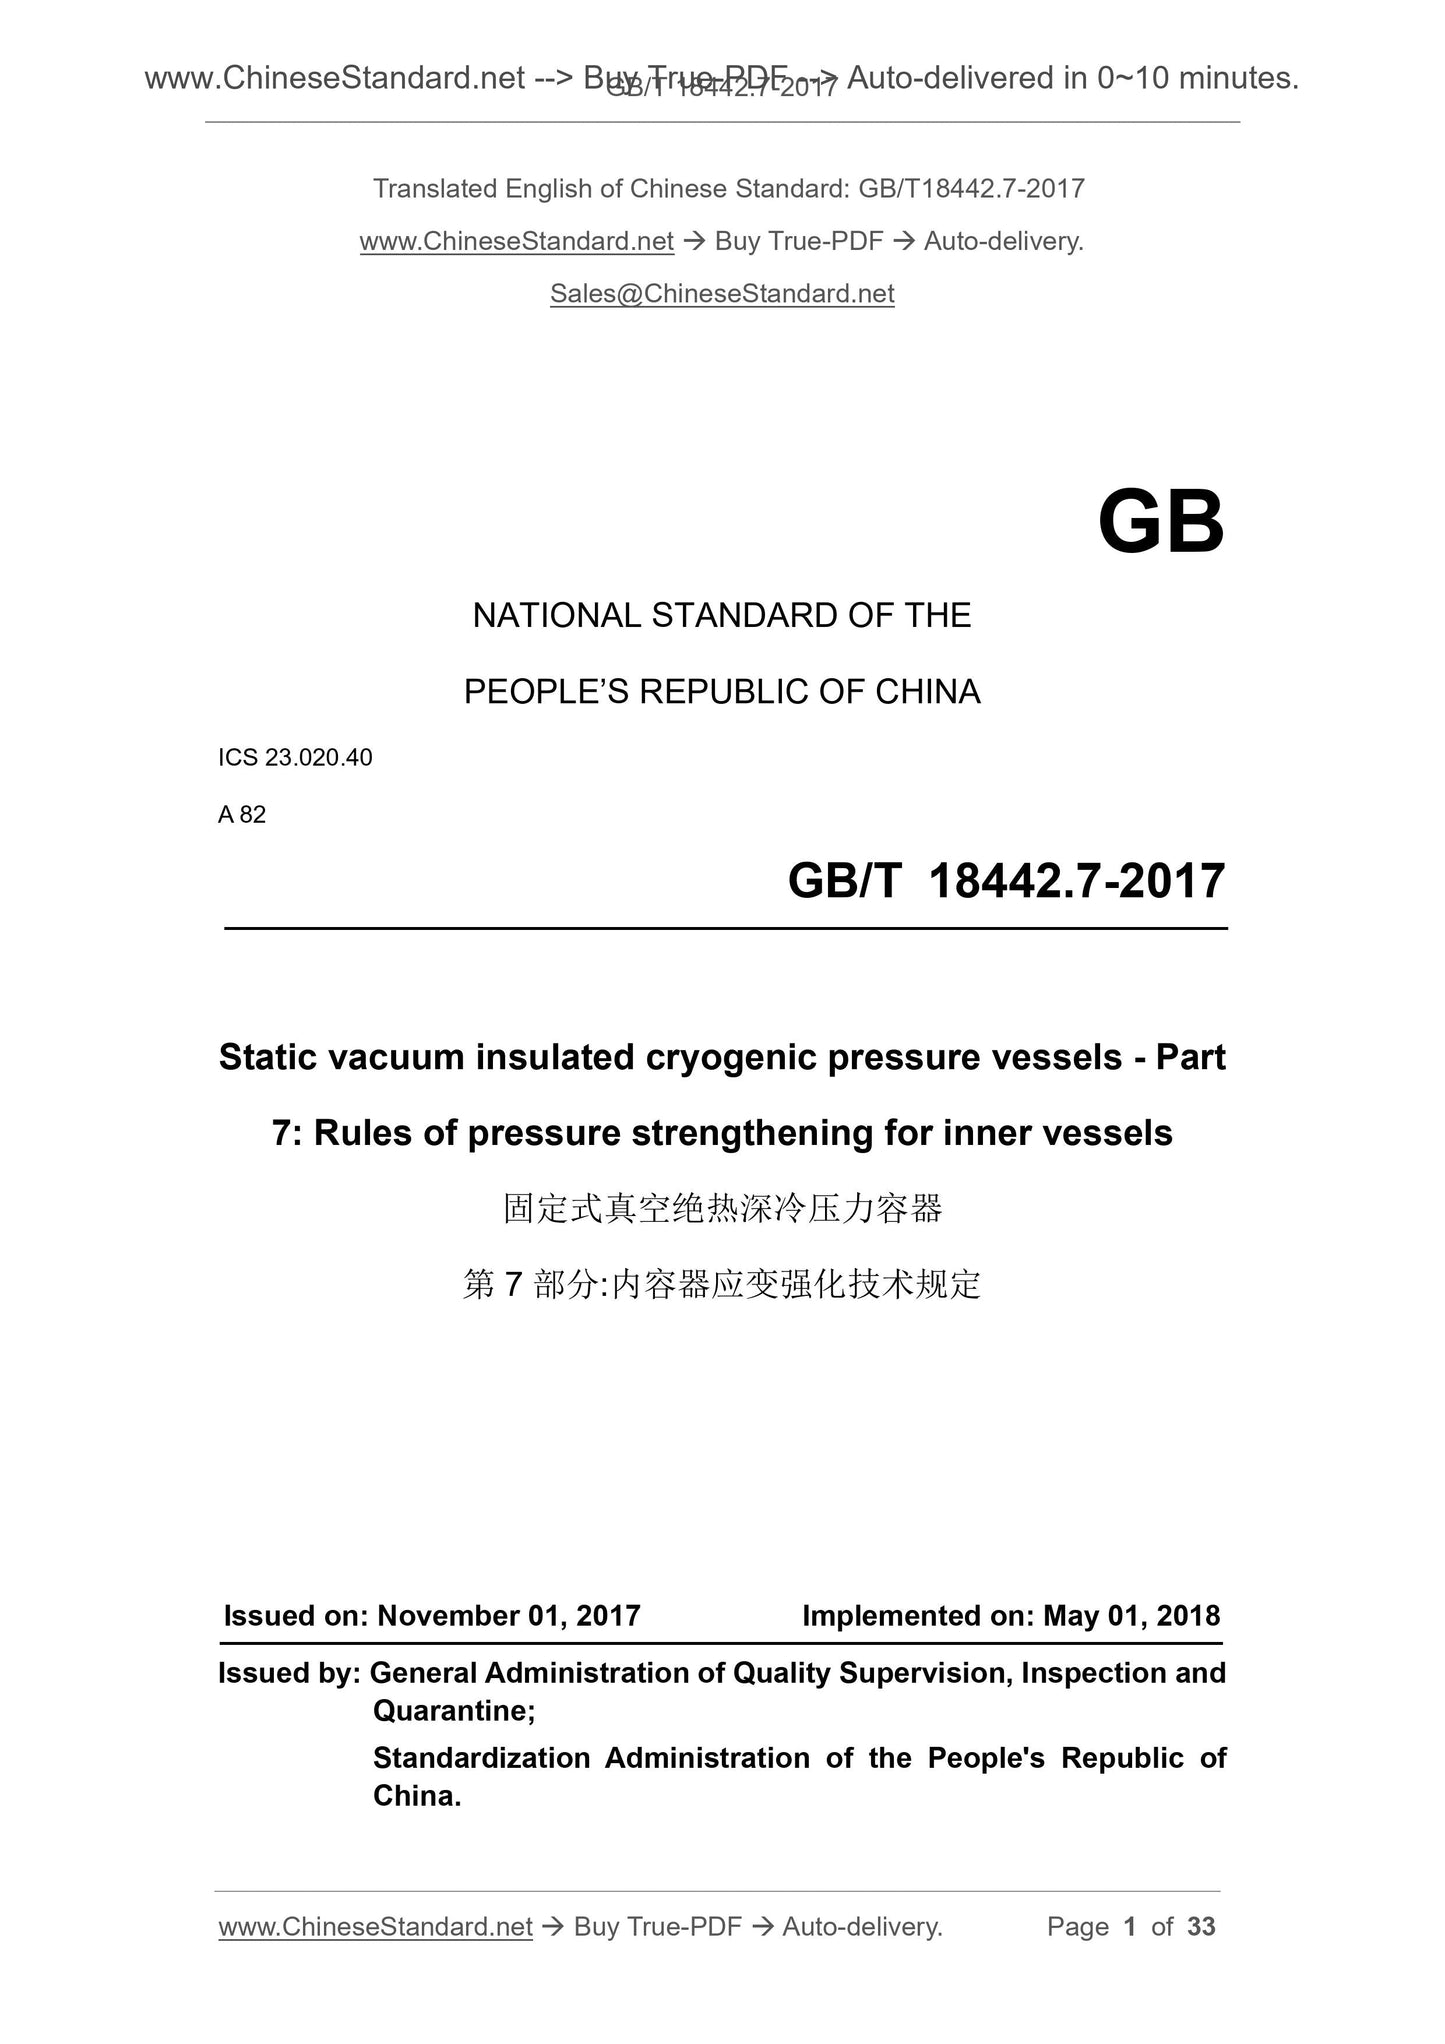 GB/T 18442.7-2017 Page 1